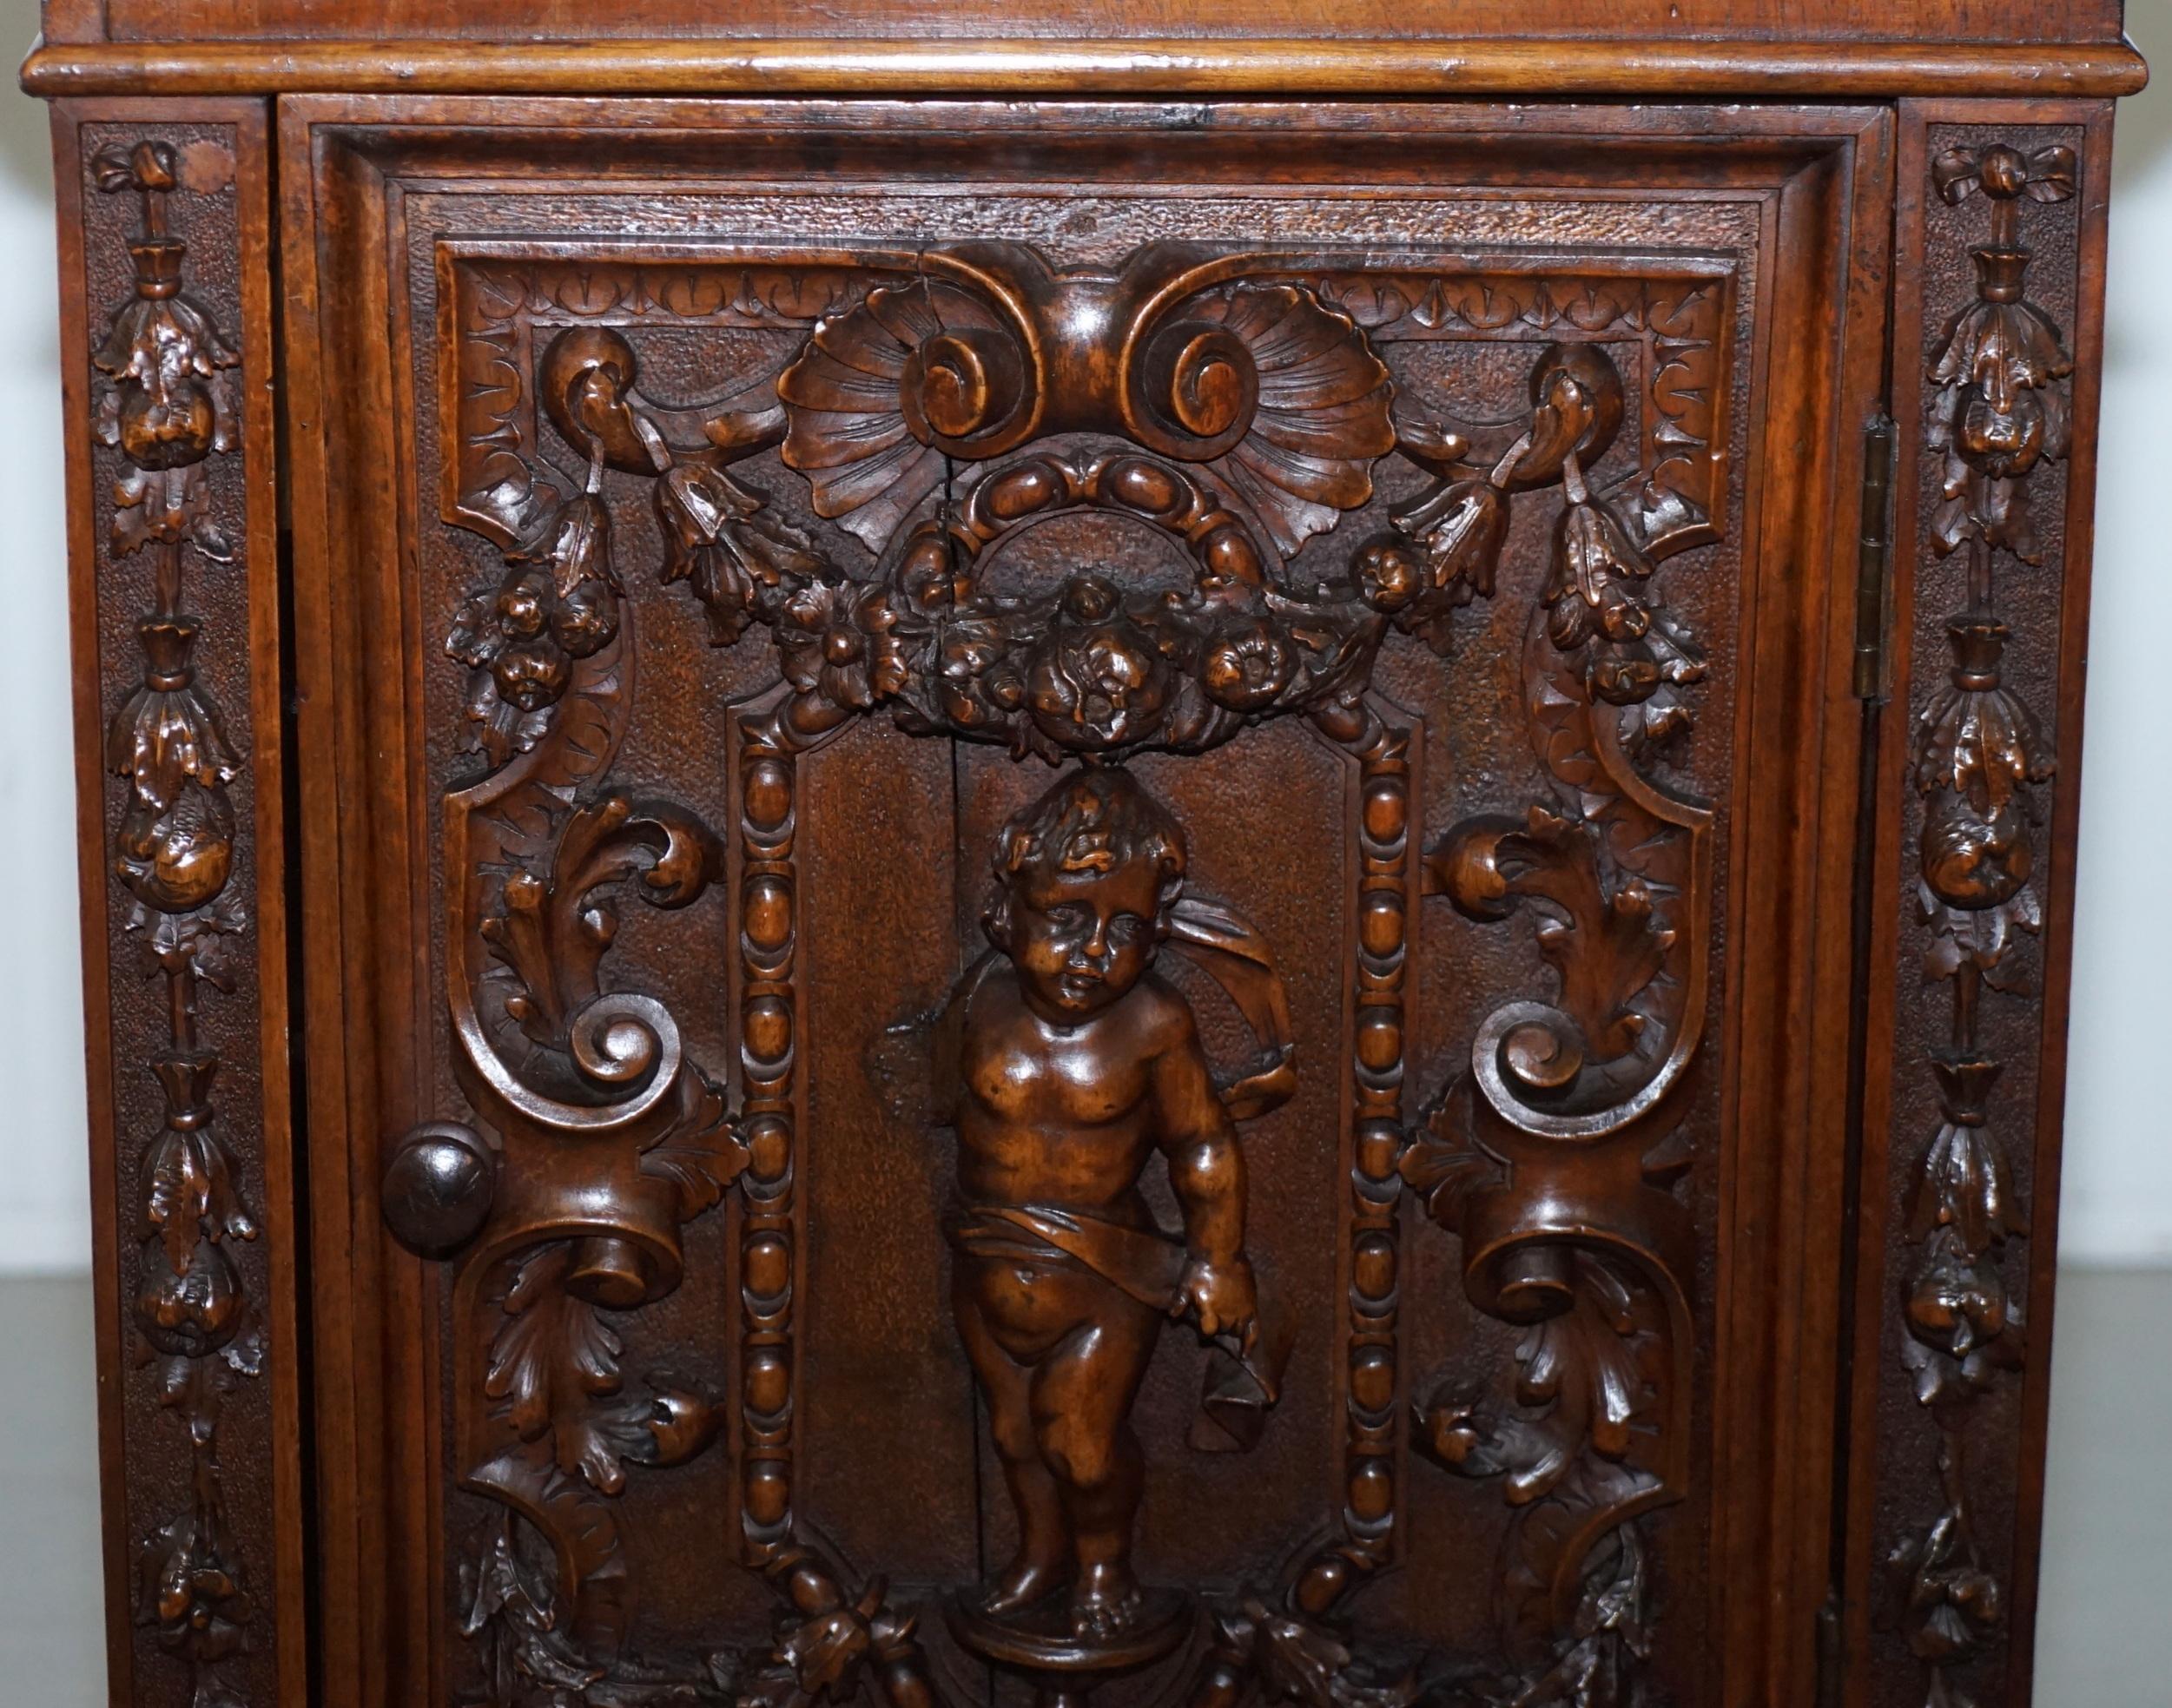 Hand-Crafted Stunning circa 1780 Carved Walnut Side Cabinet with Cherub & Floral Detailing